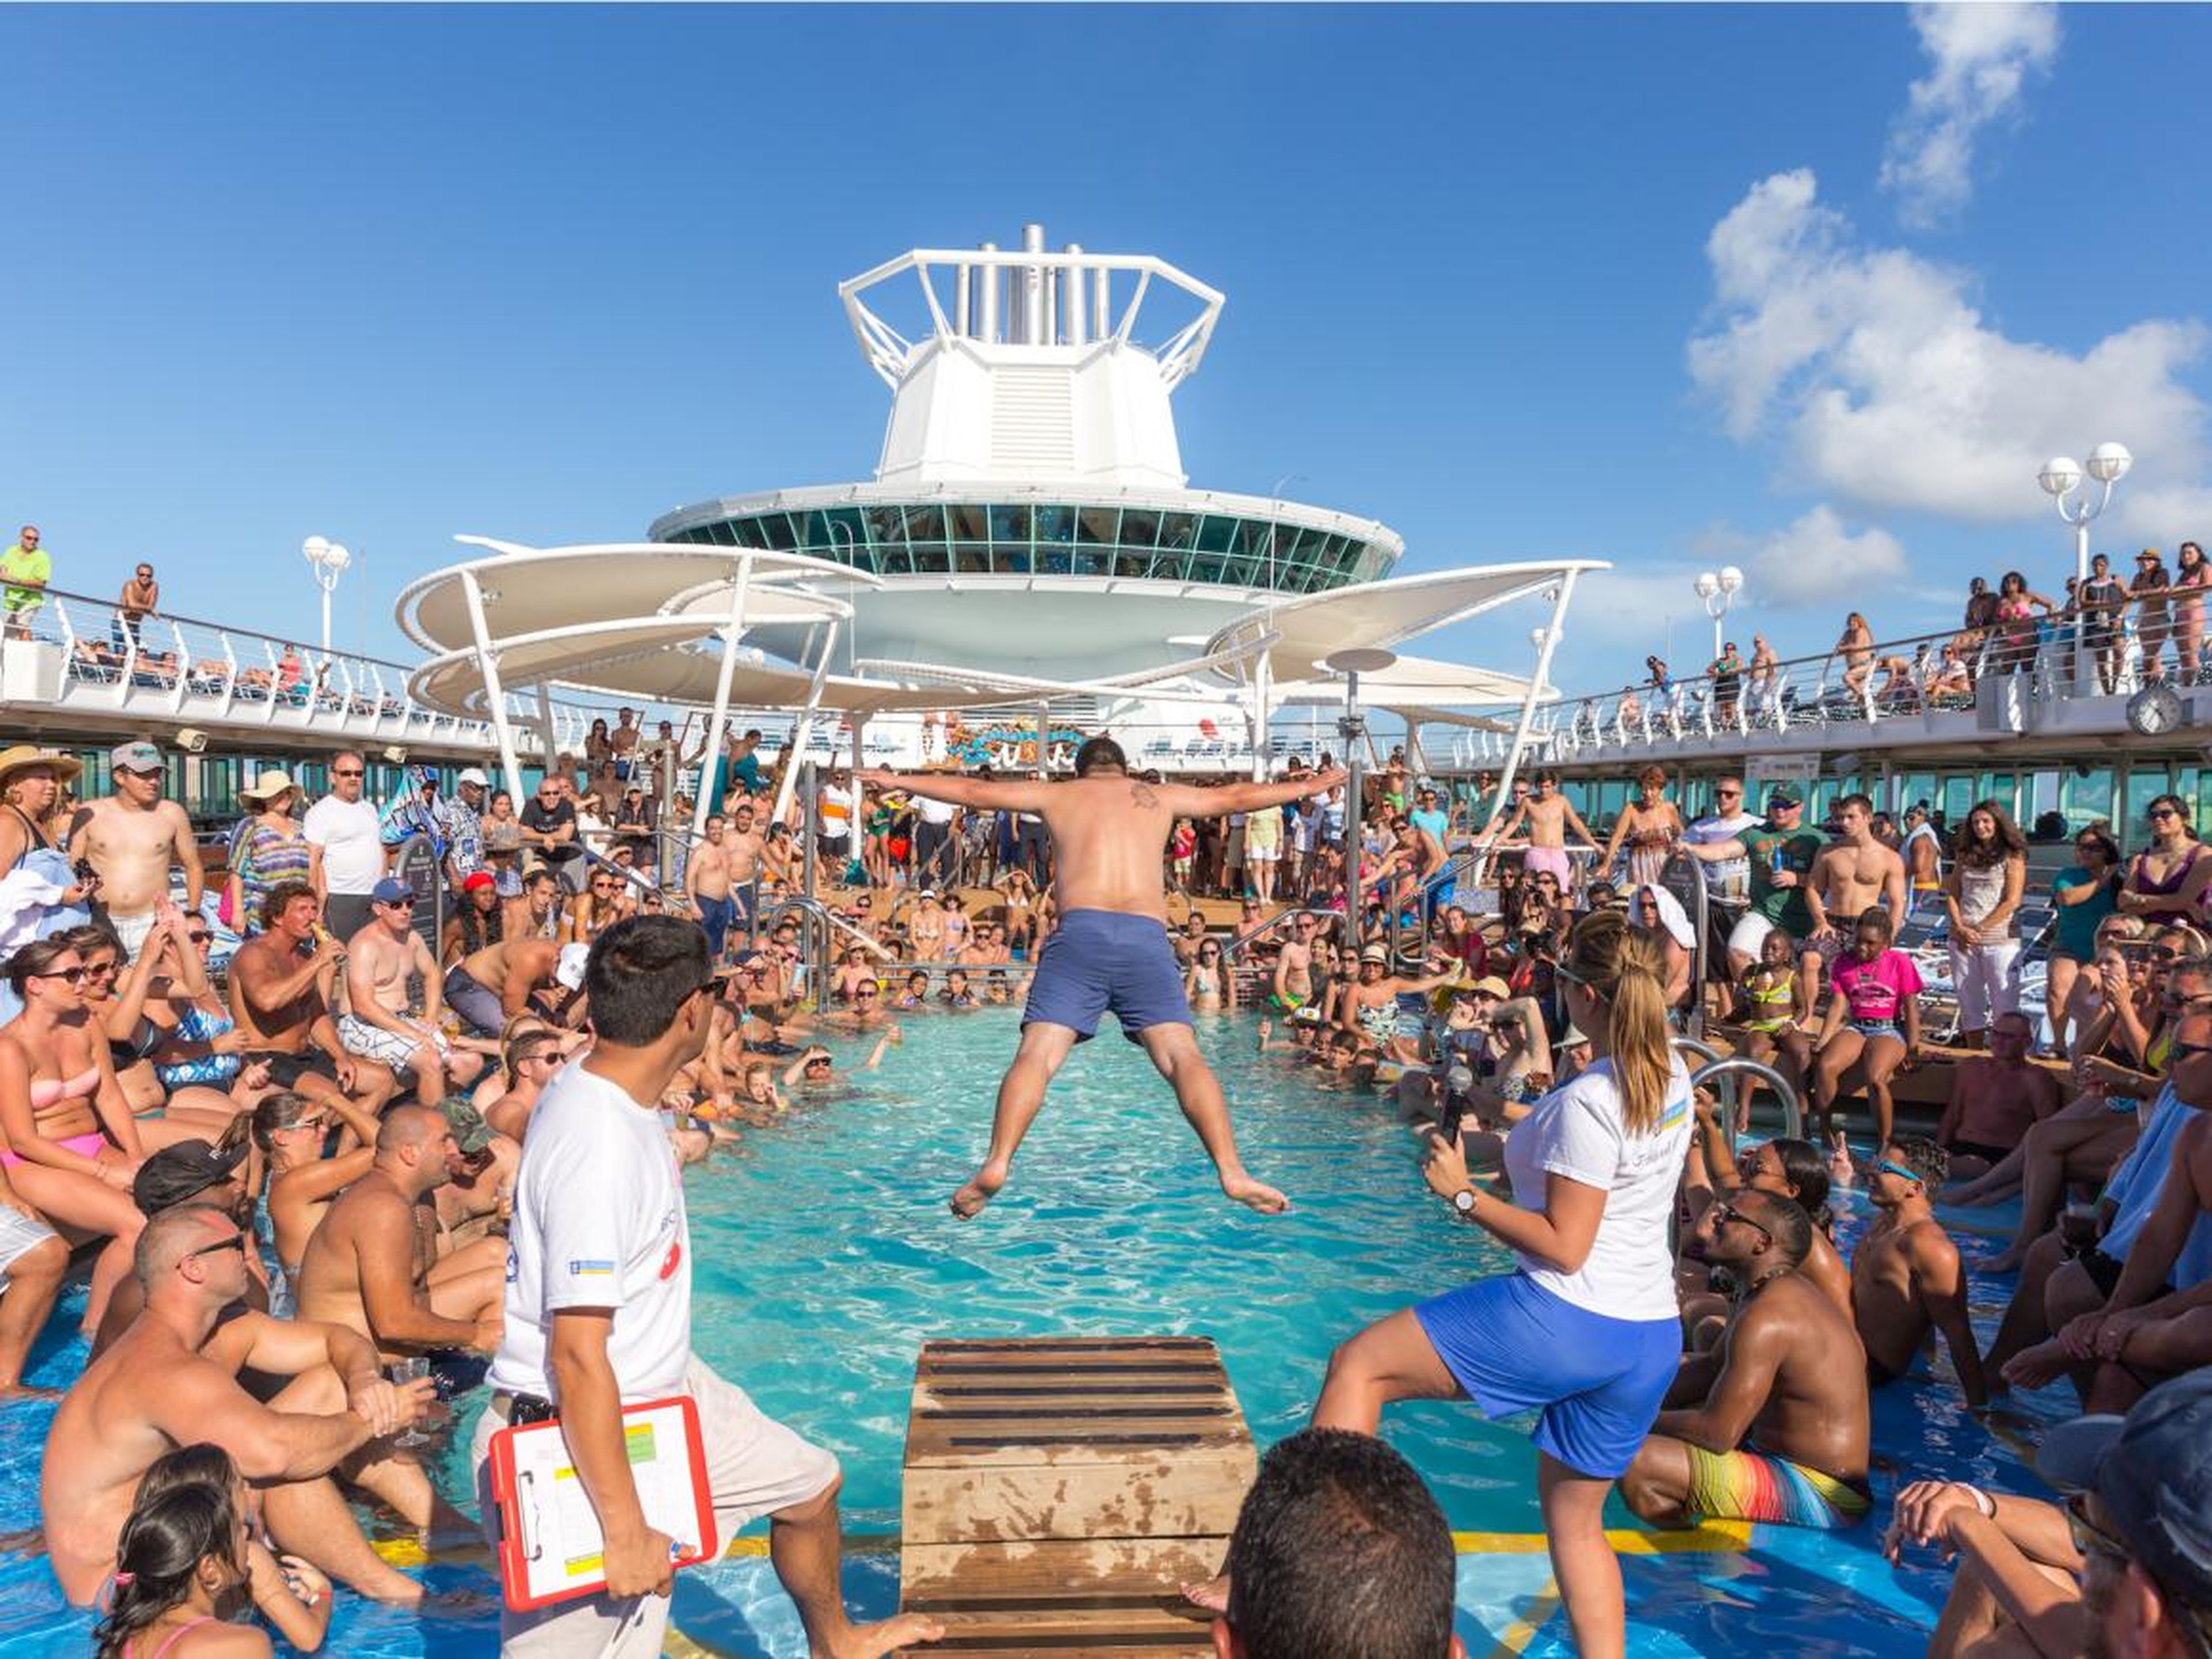 "Most of the guests were genuinely nice people, but there were a few who took the 'being American' thing a little too far," a former Seabourn Cruise Line employee said.